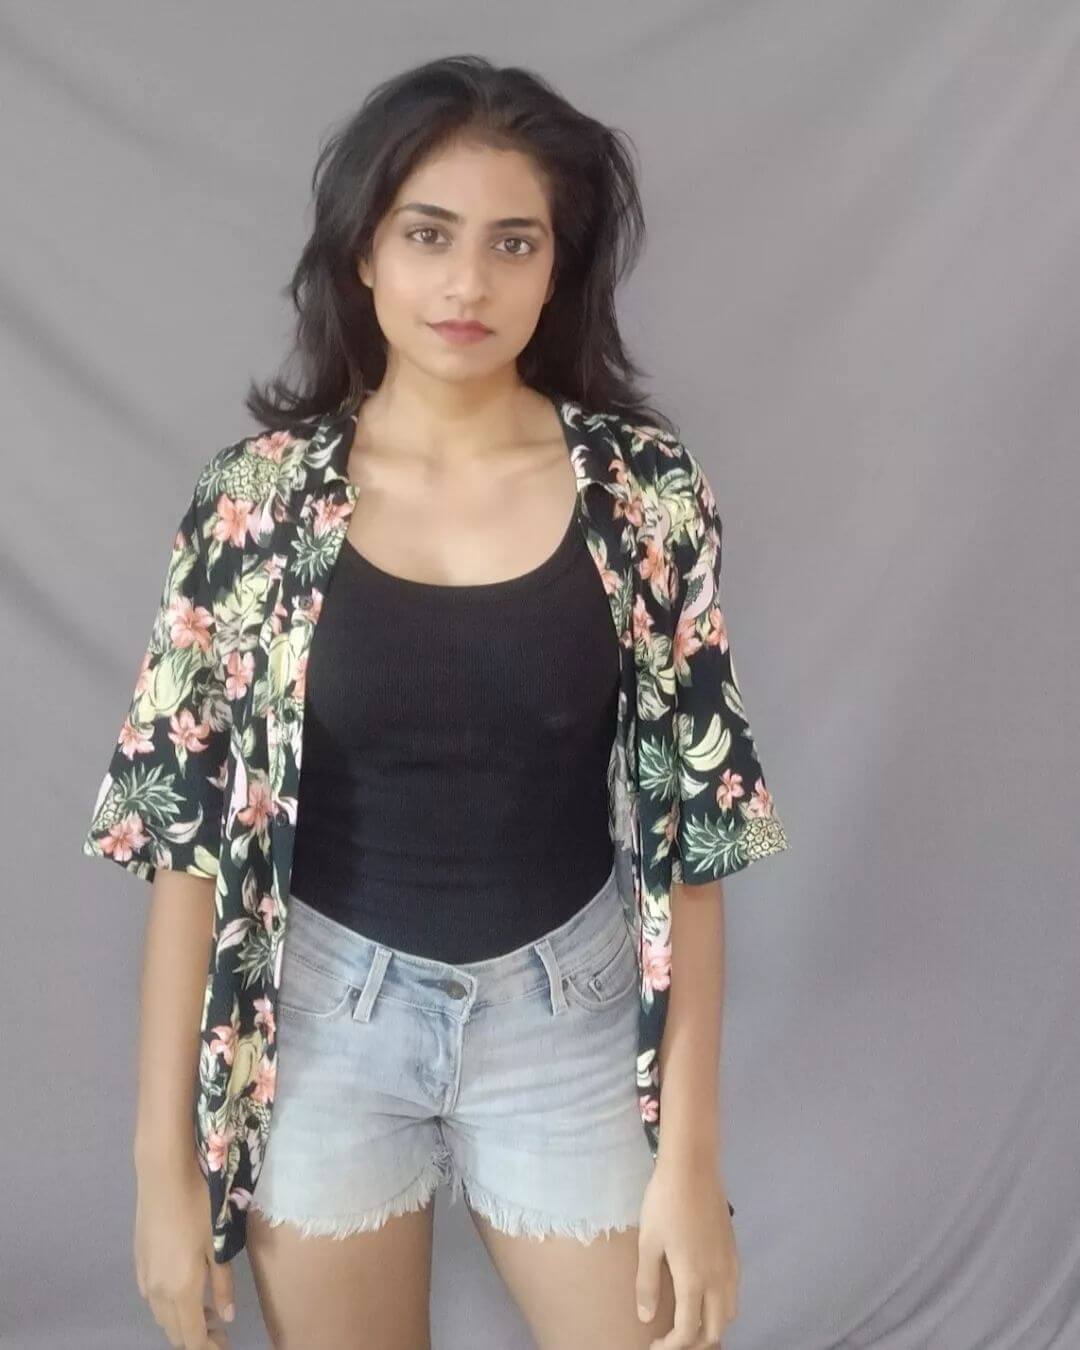 Actress Zarin Shihab in black top and gens shorts